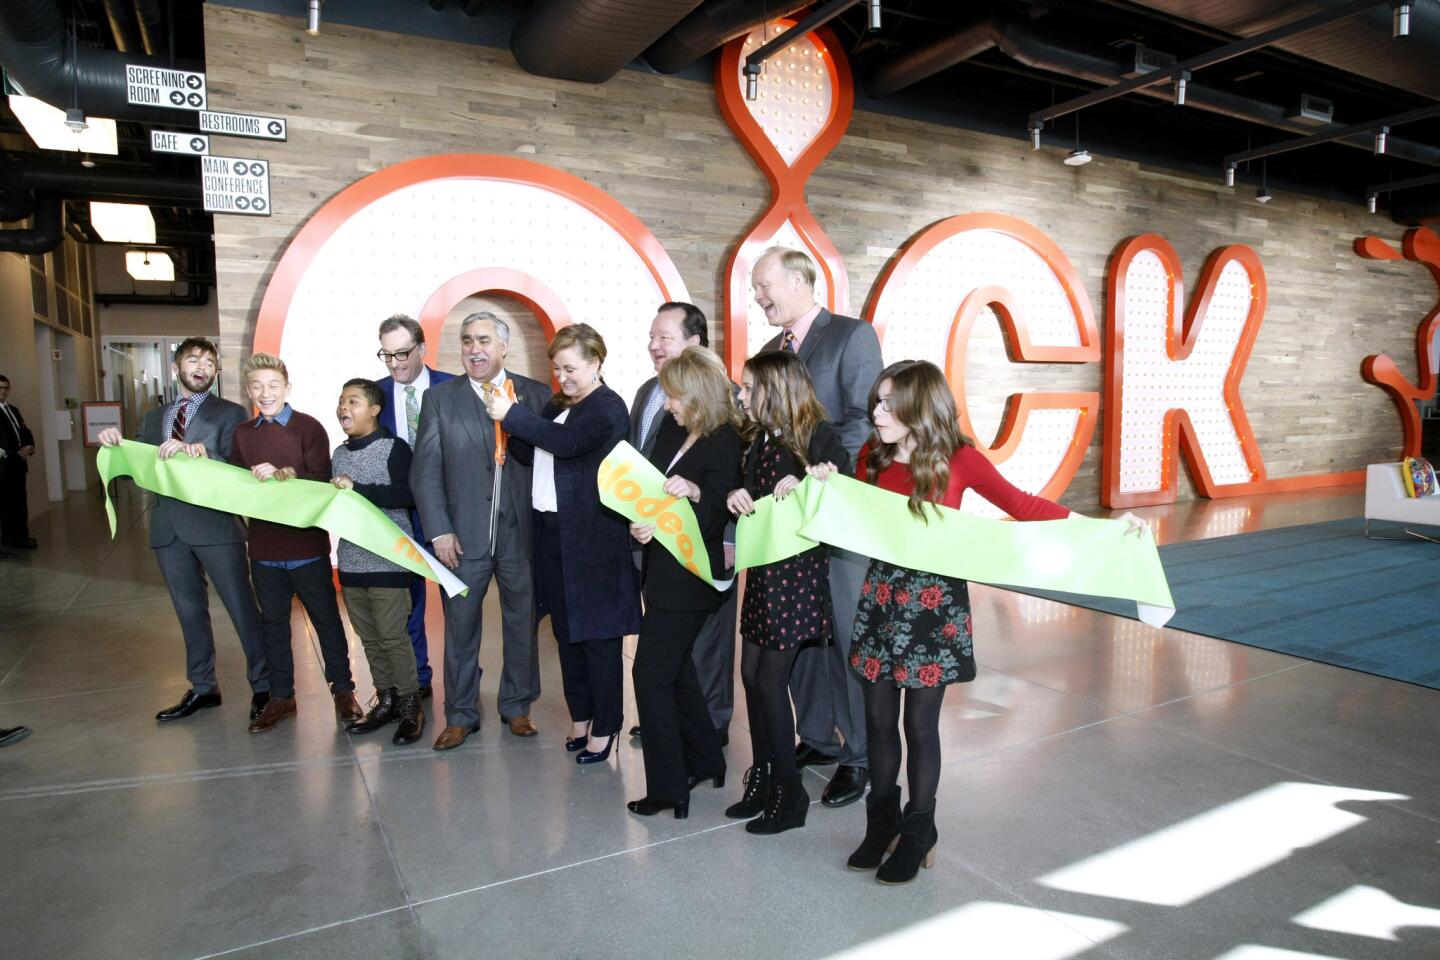 With Burbank mayor Jess Talamantes at center left, President of the Nickelodeon Group Cyma Zarghami, center right holding scissors, cut the ribbon during ceremony for their new state-of-the-art building at the Olive Avenue campus in Burbank on Wednesday, Jan. 11, 2017. The 5-story building, with more than 200,000 square-feet of space, will house more than 700 employees and more than 20 show productions.